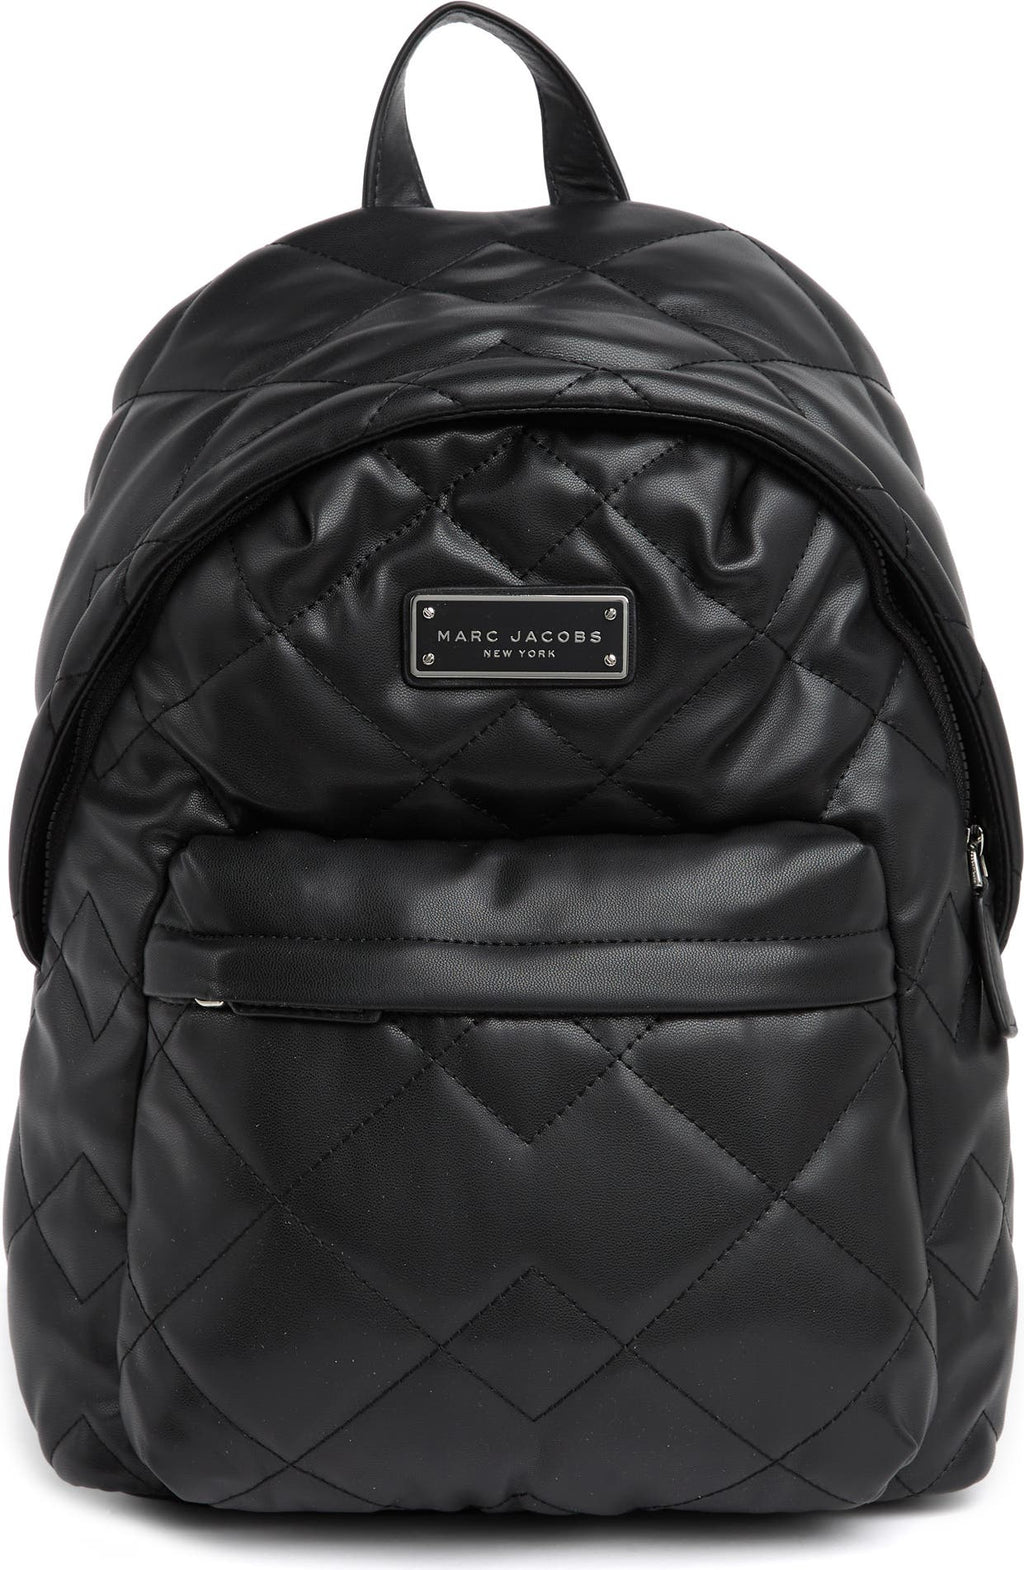 MARC JACOBS Quilted Backpack, Main, color, BLACK